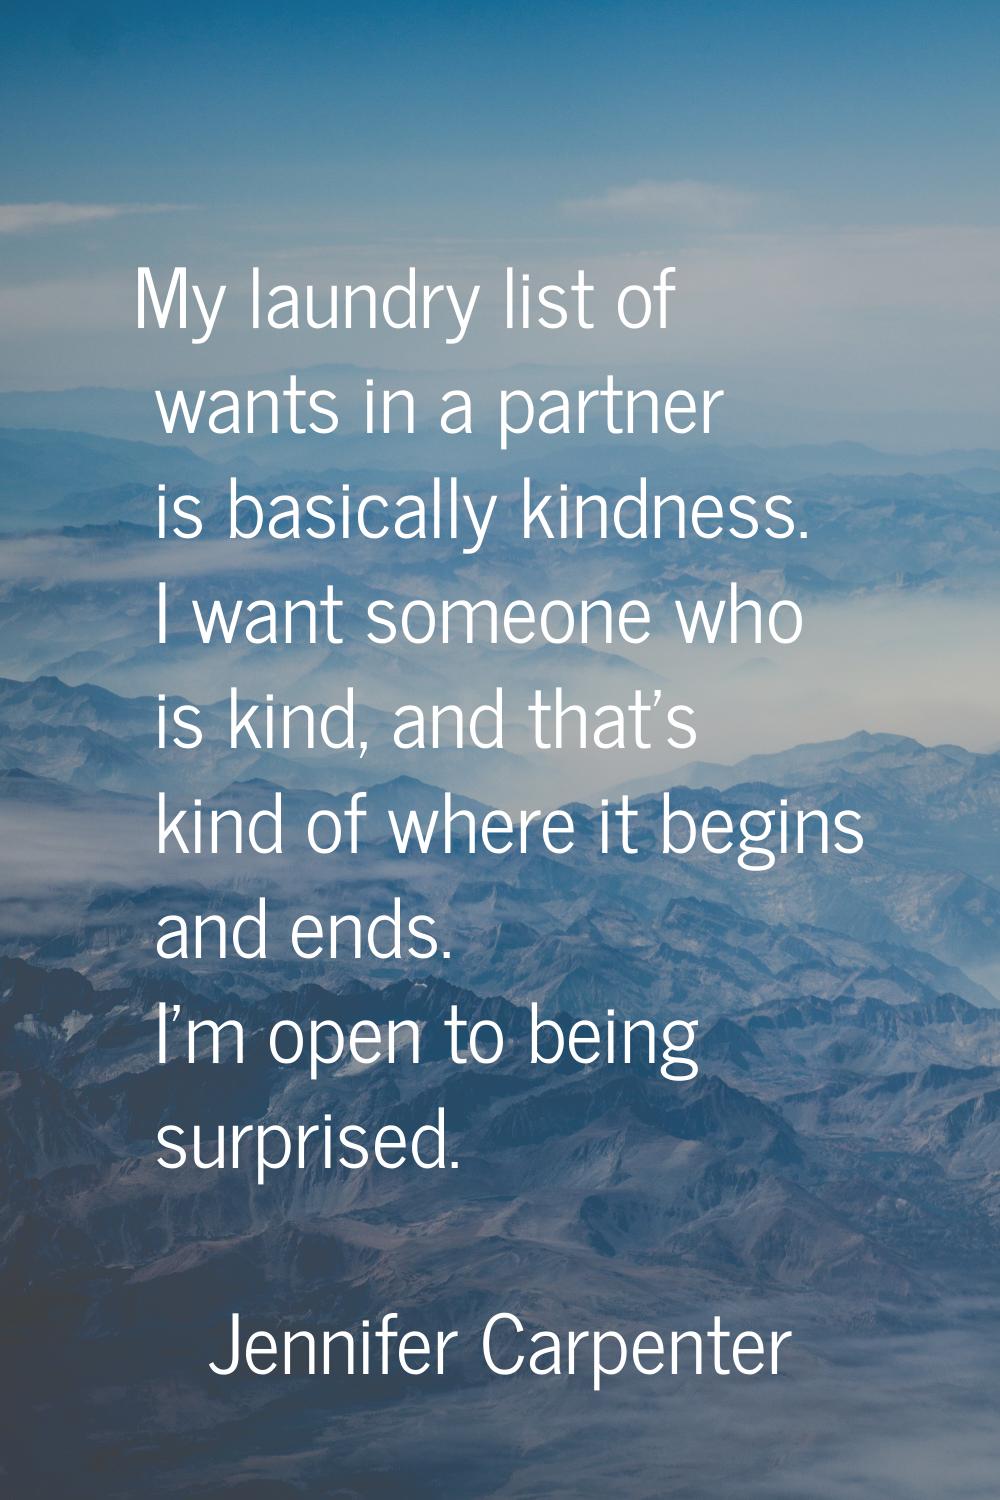 My laundry list of wants in a partner is basically kindness. I want someone who is kind, and that's